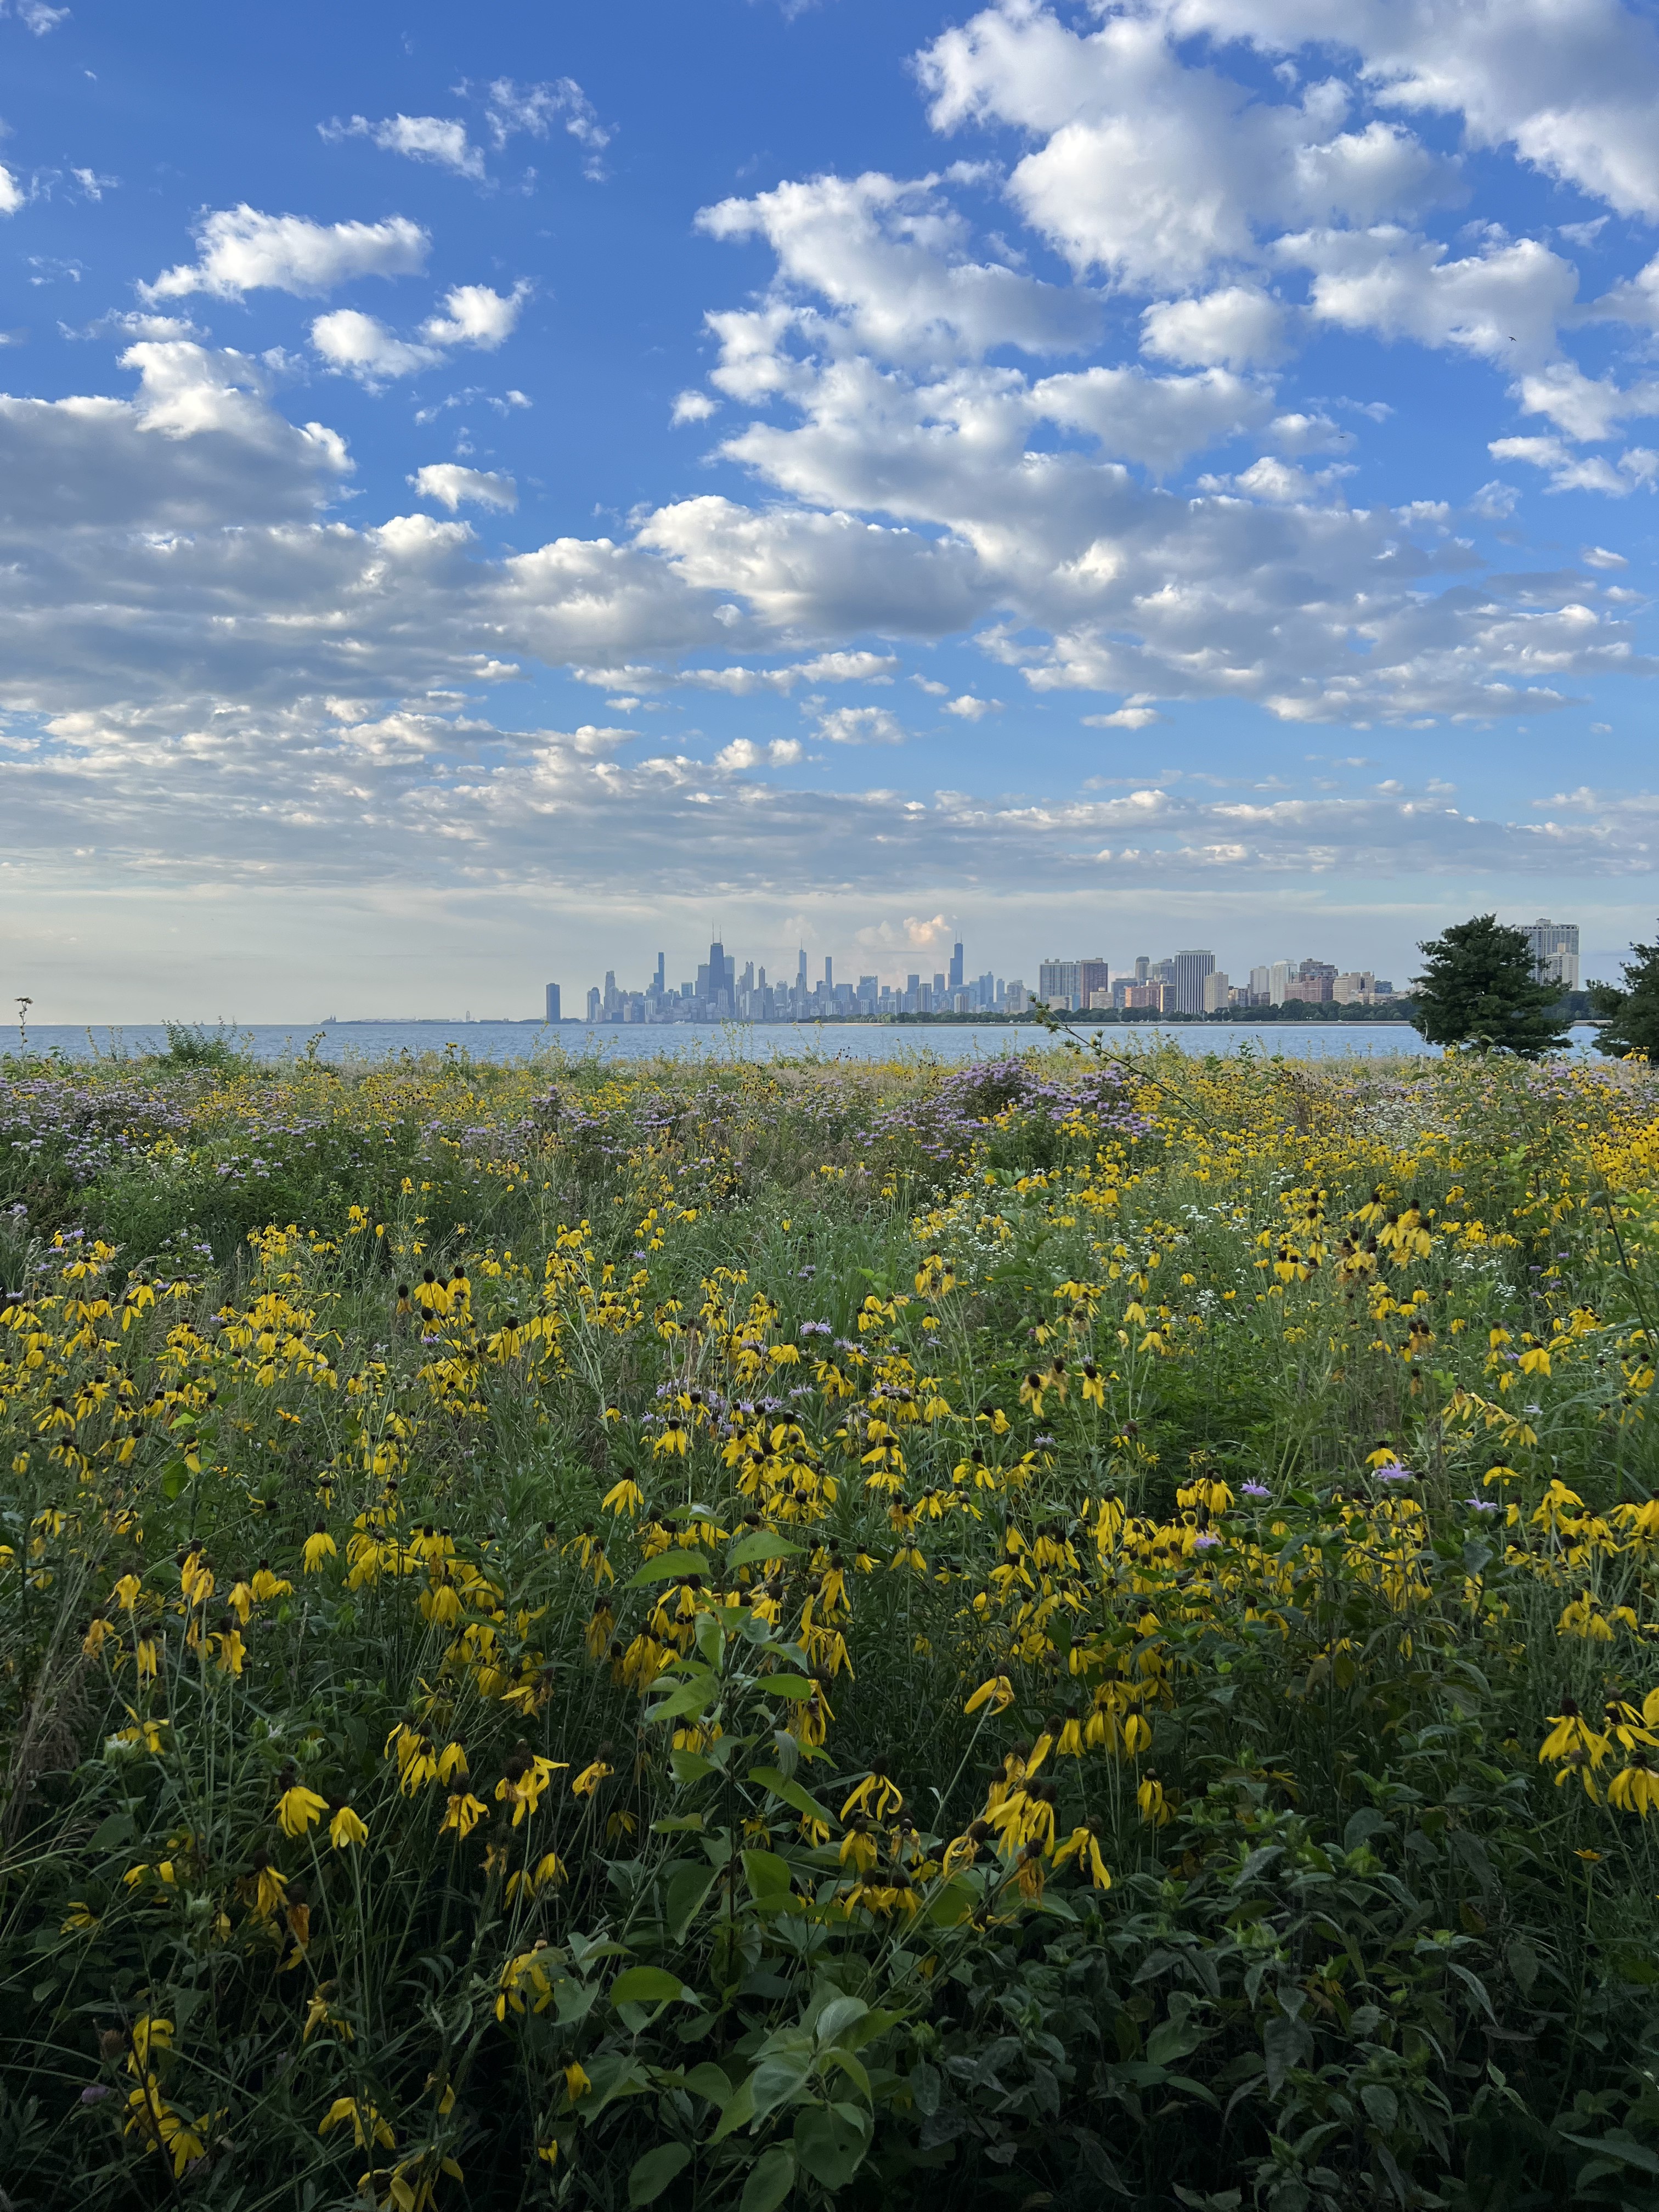 A picture of the Chicago skyline above some flowers